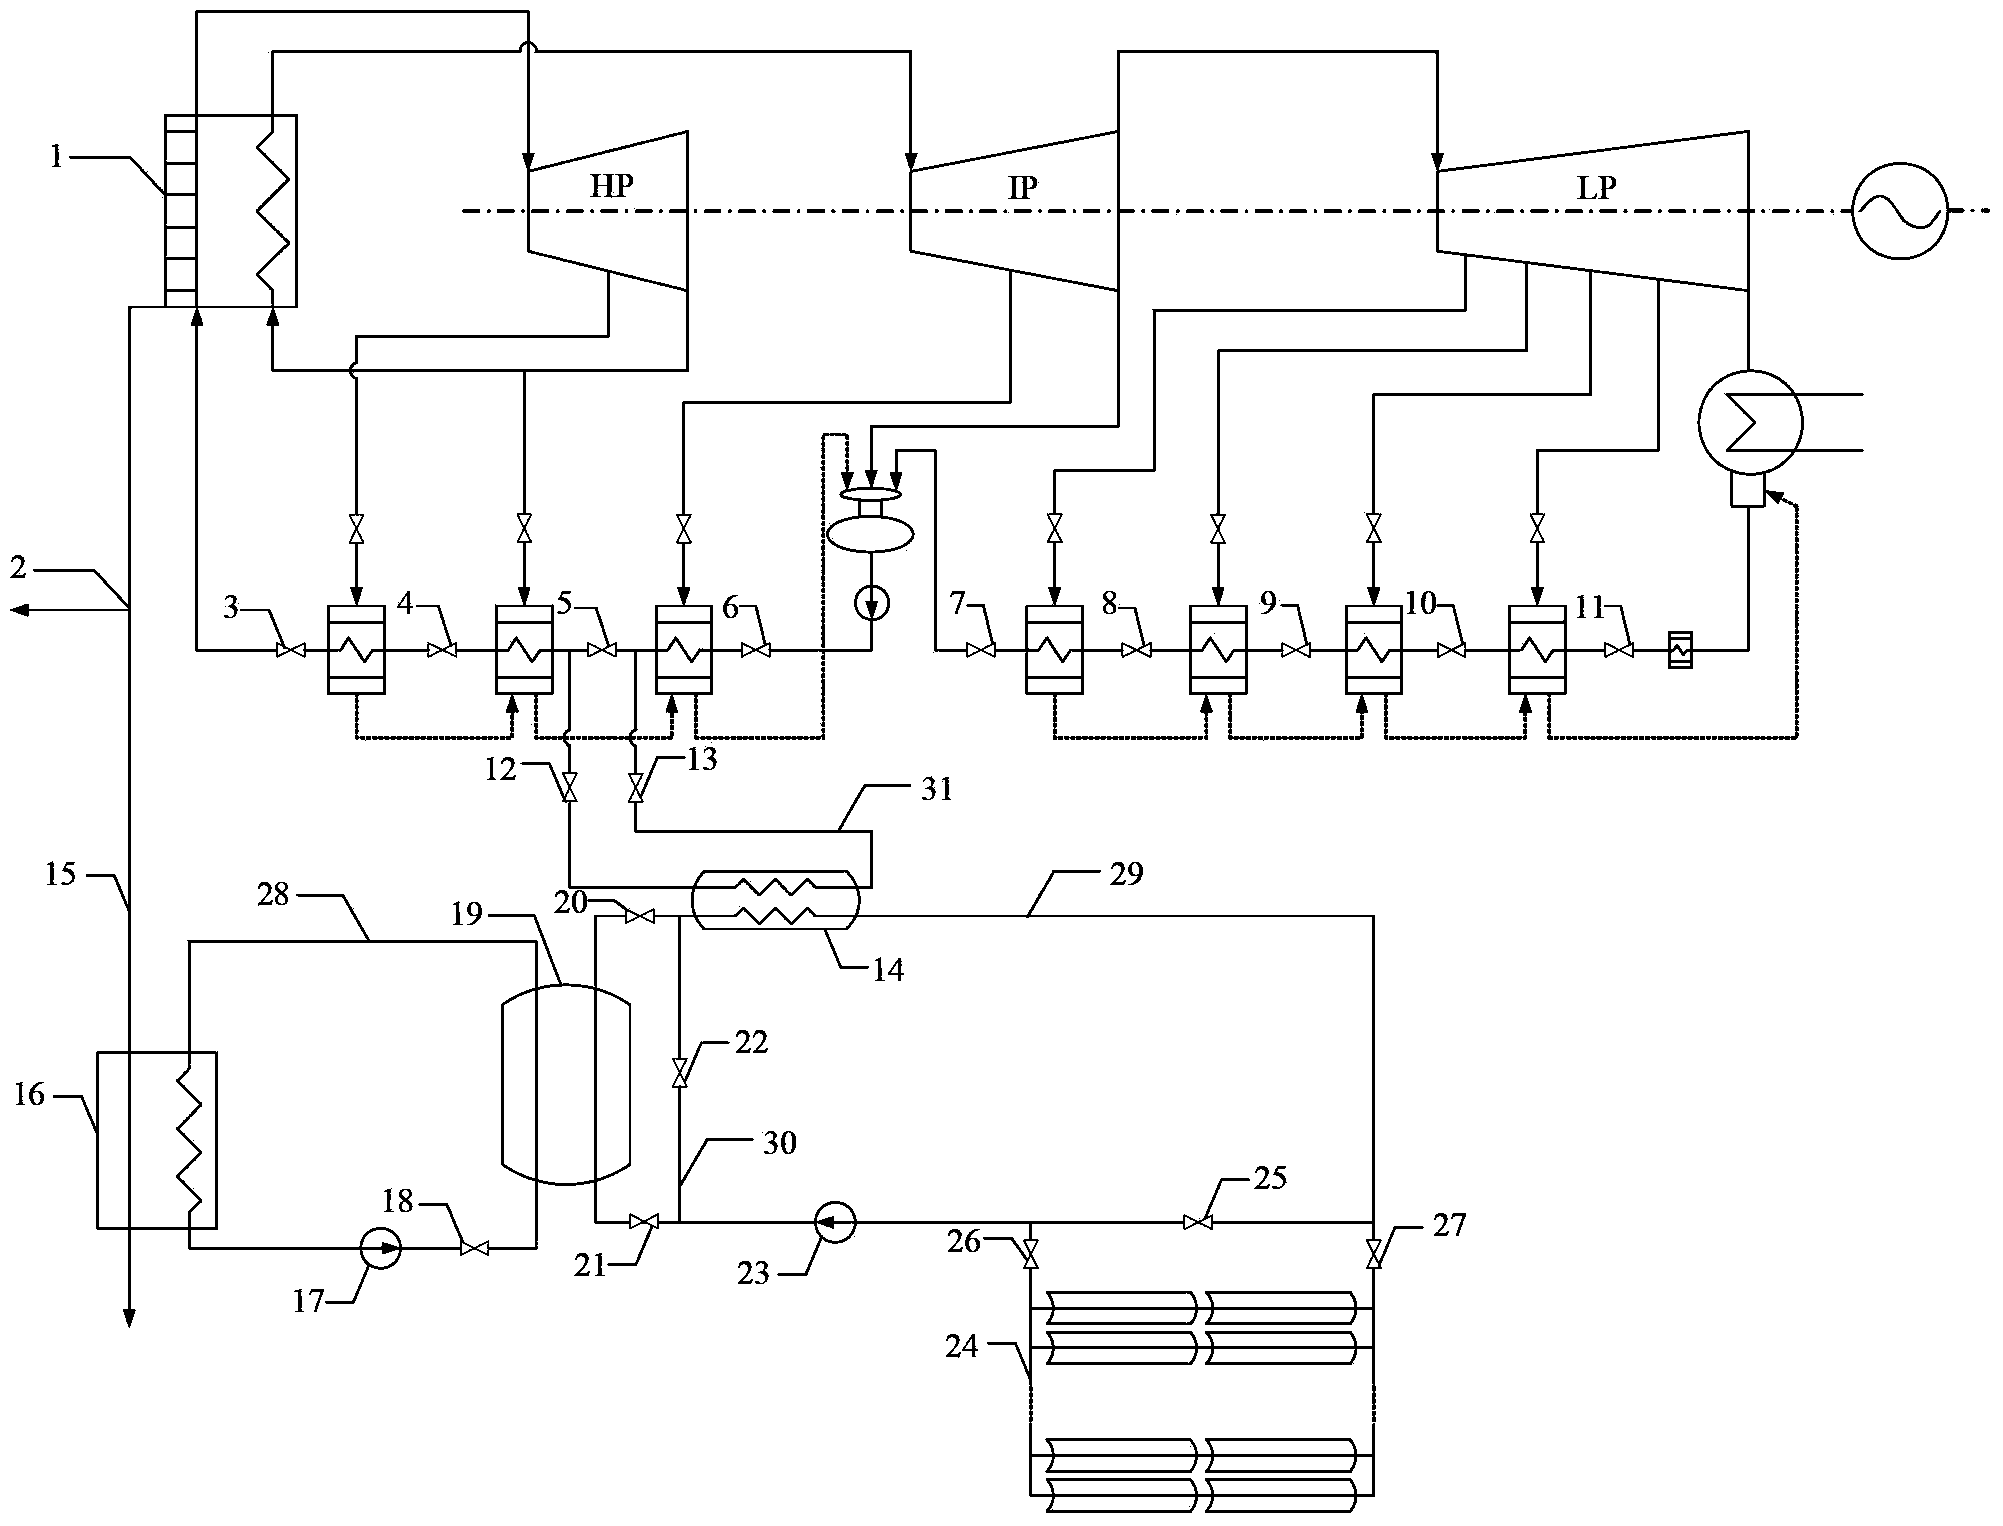 System for assisting coal-burning boiler to generate power by utilizing solar energy and waste heat of ash residue